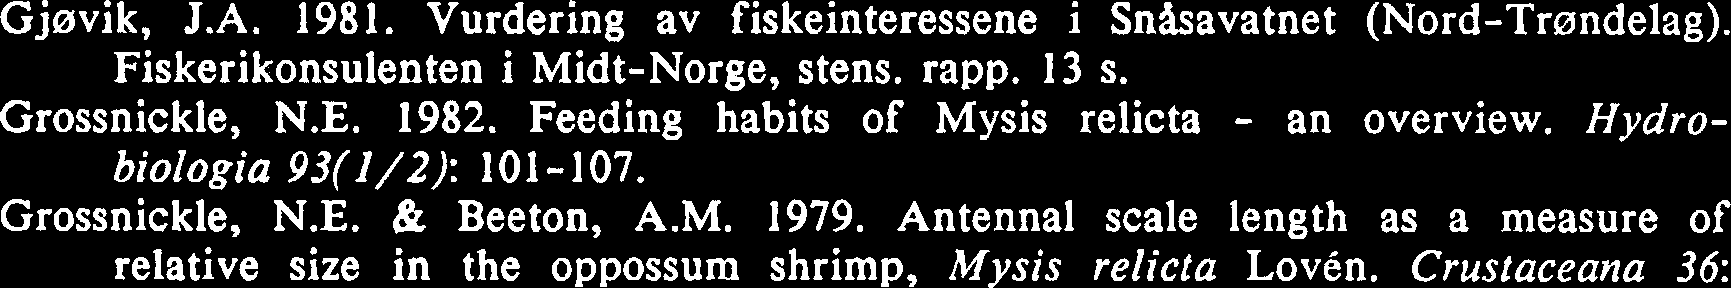 Symposium on Mysids and their Impacts on Fisheries. Fort Collins, Colorado 1988. Stensilerte Abstracts, p. 9. Bremer, P. and Vijverberg, J. 1982.